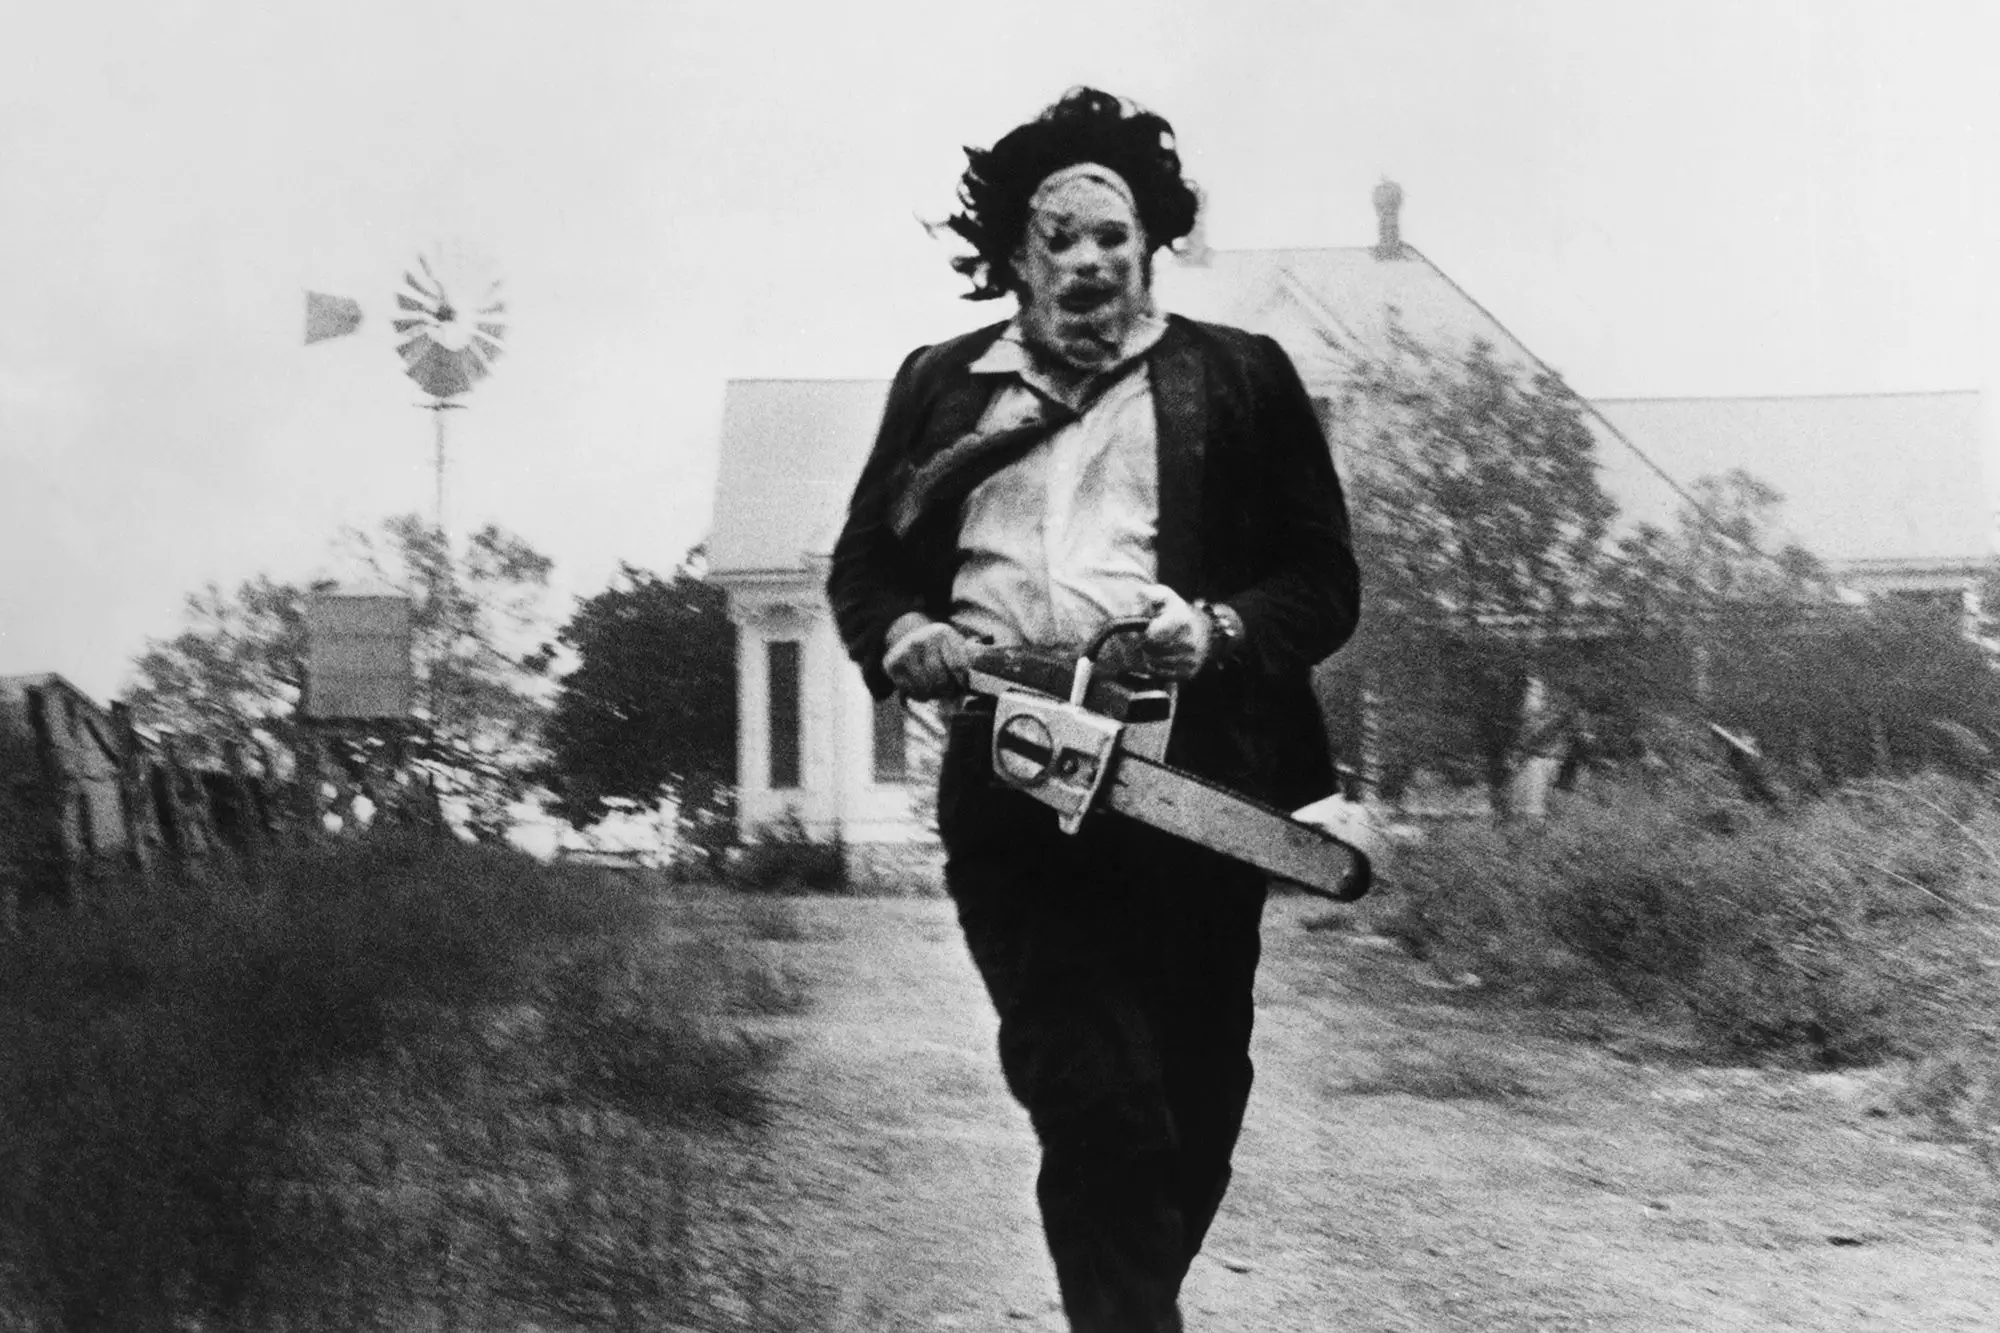 The image of Leatherface running from the Victorian house has become one of horror's most iconic shots (